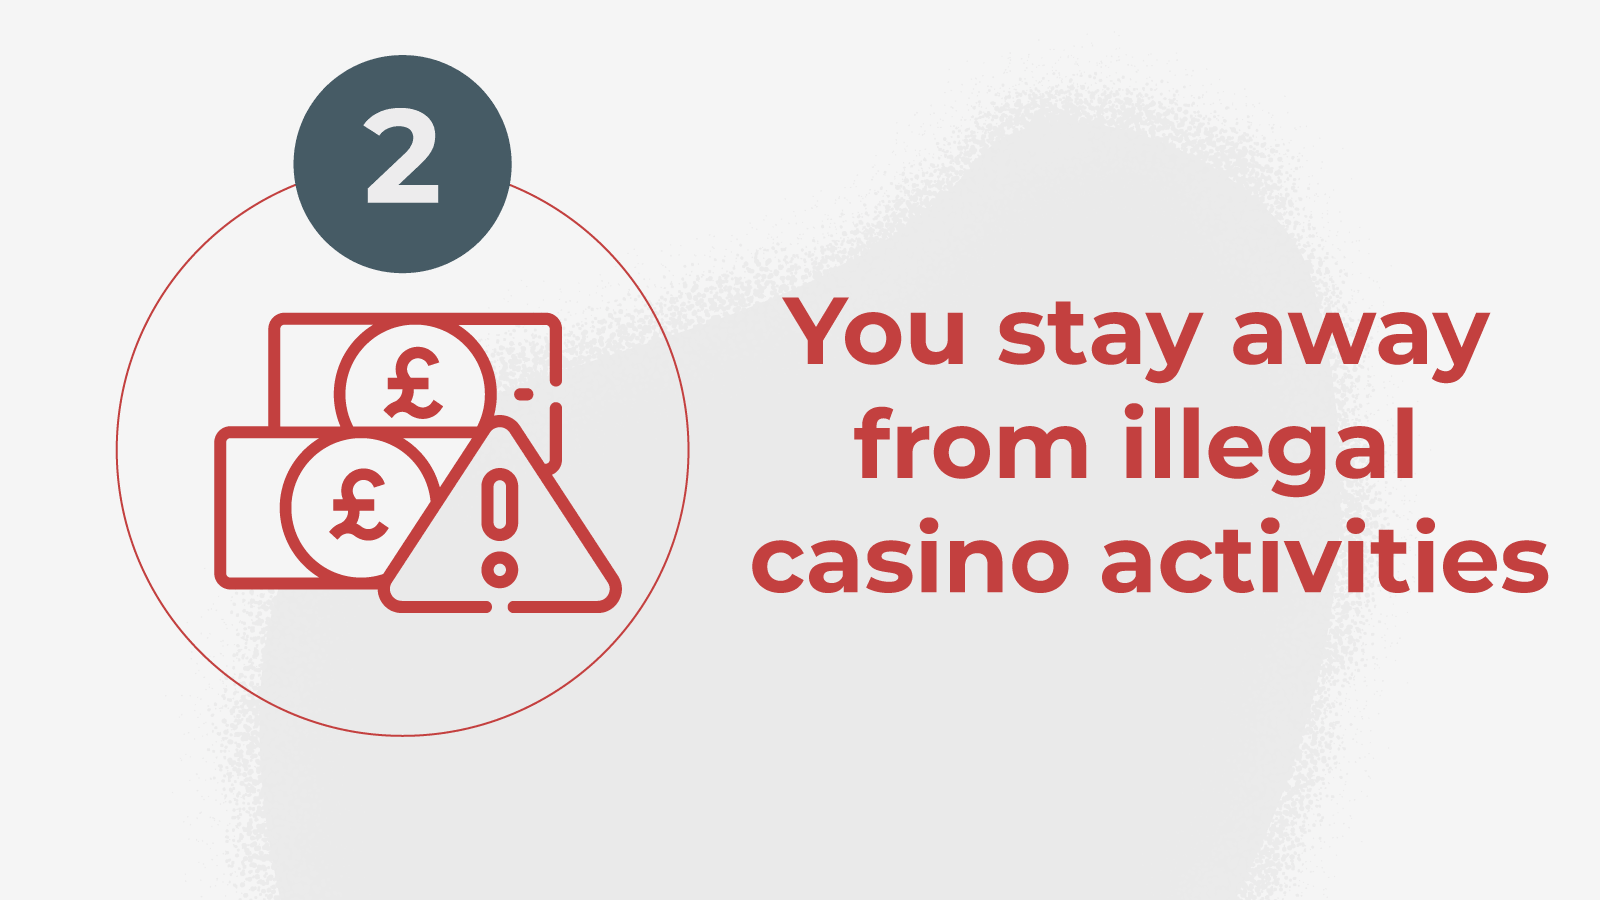 2.You stay away from illegal casino activities